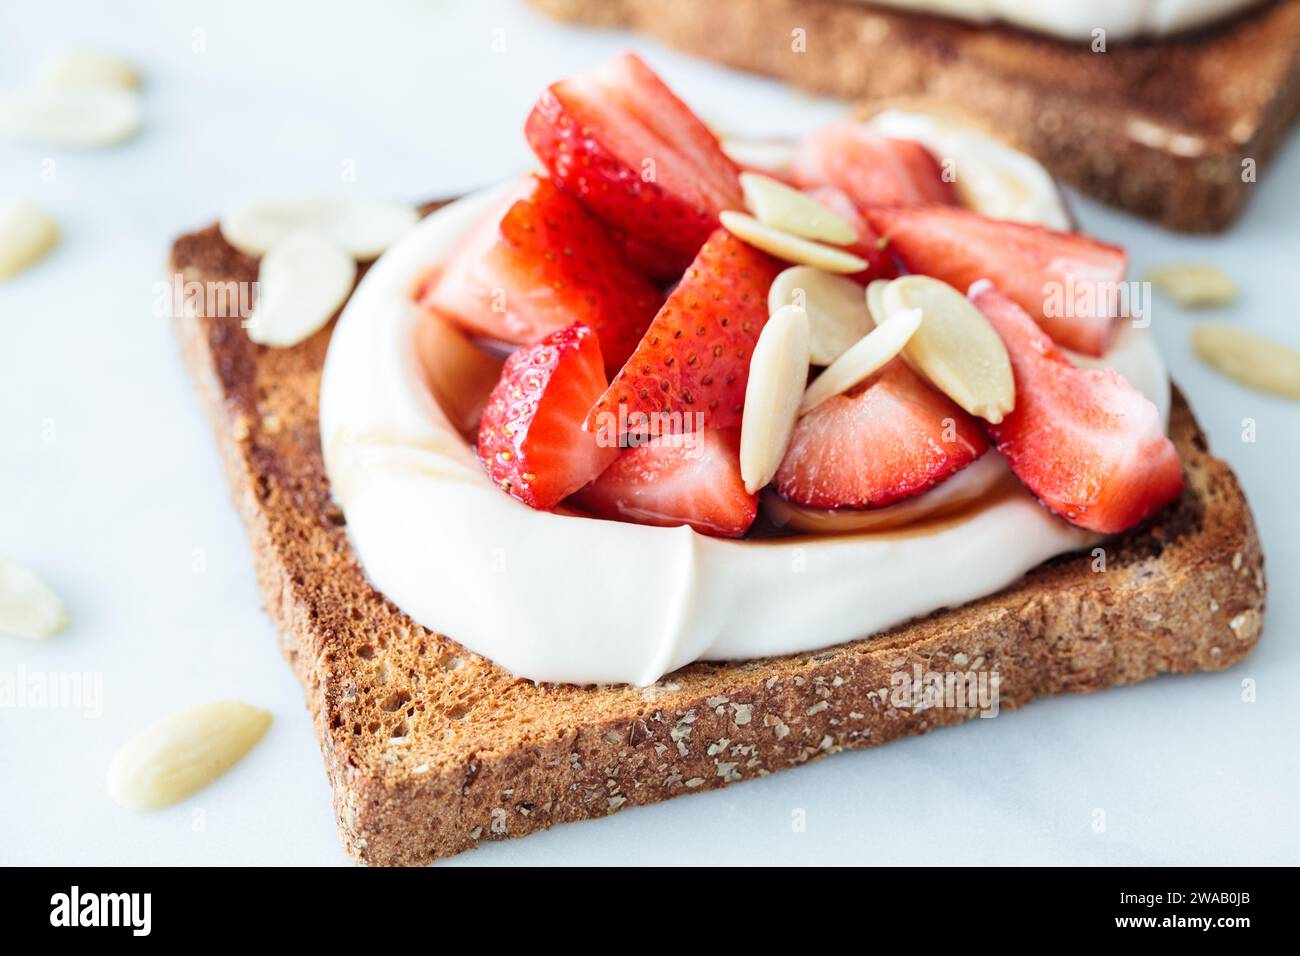 Crispy breakfast toast with ricotta, strawberries and almonds on a white marble background. Stock Photo